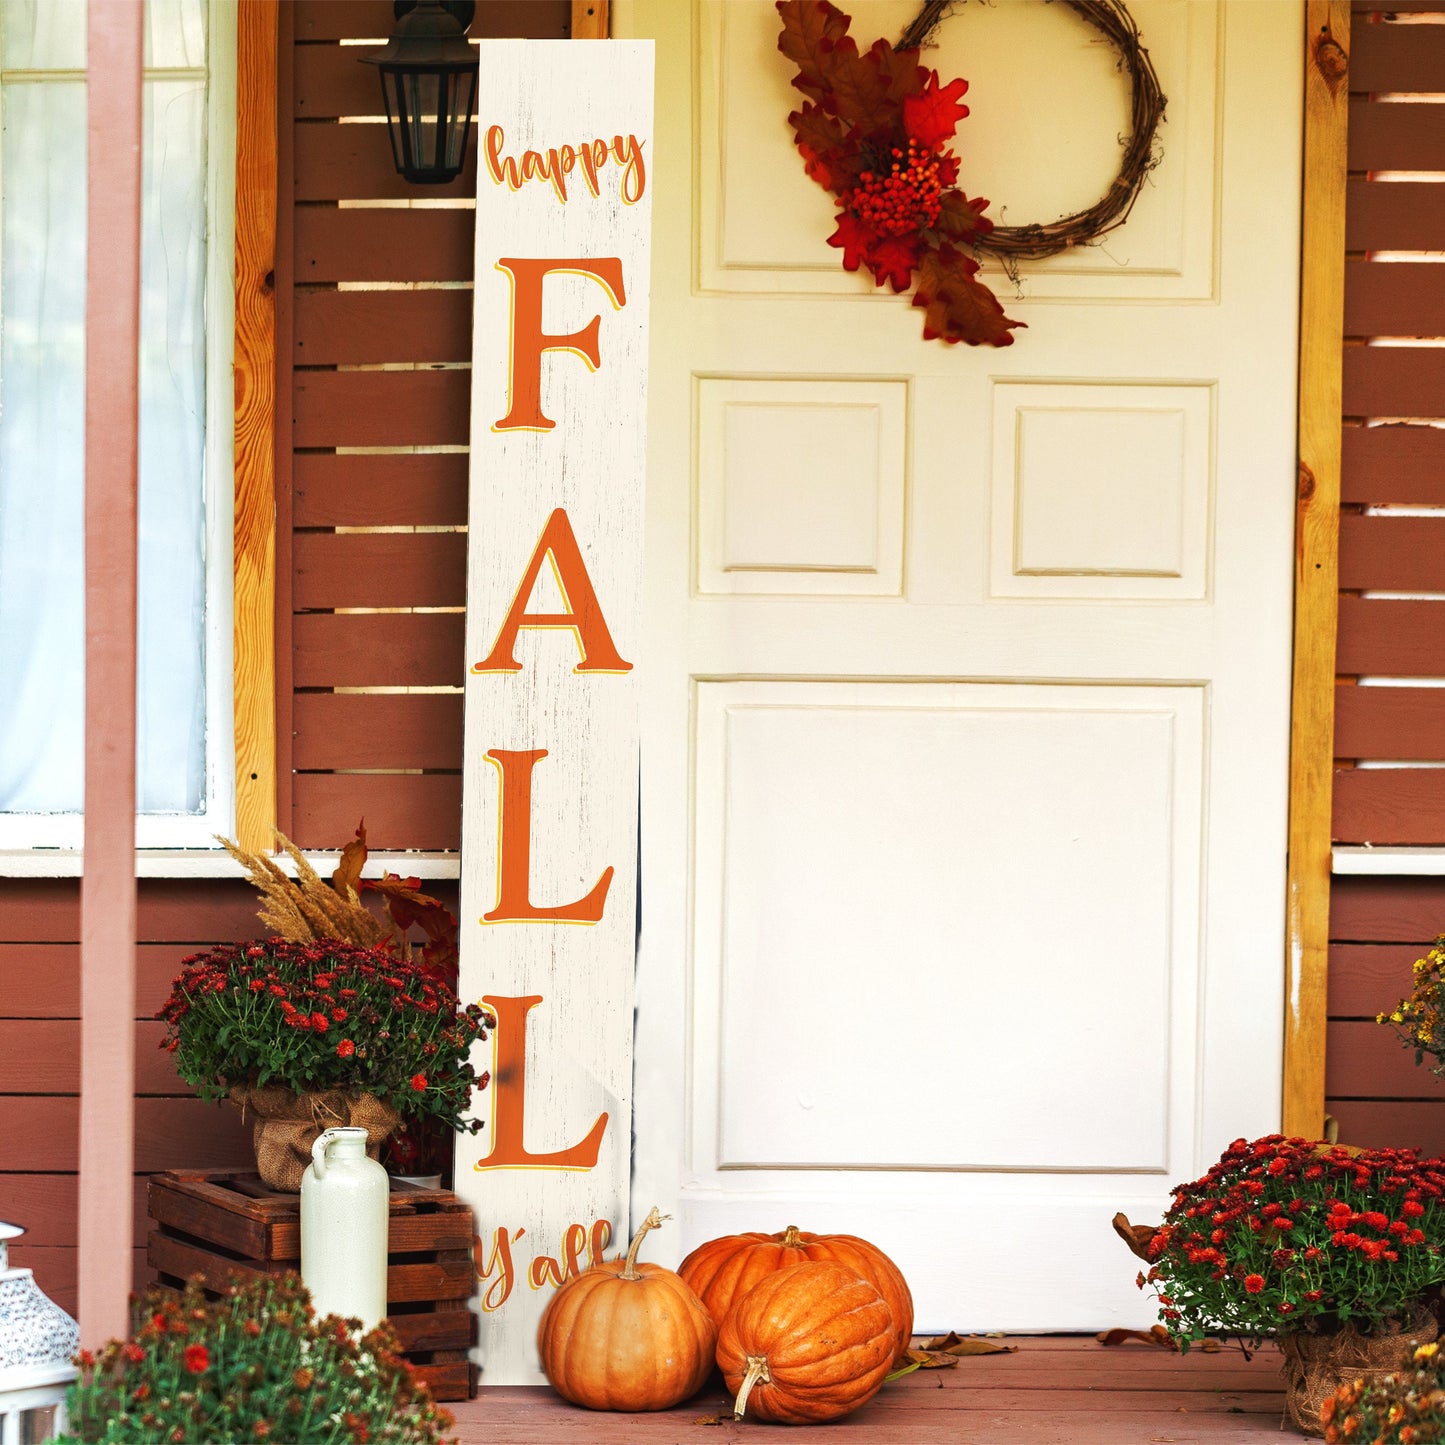 72in "Happy Fall Y'all" Porch Sign | Front Door Display | Ideal Porch Decor | Perfect for Autumn Celebrations